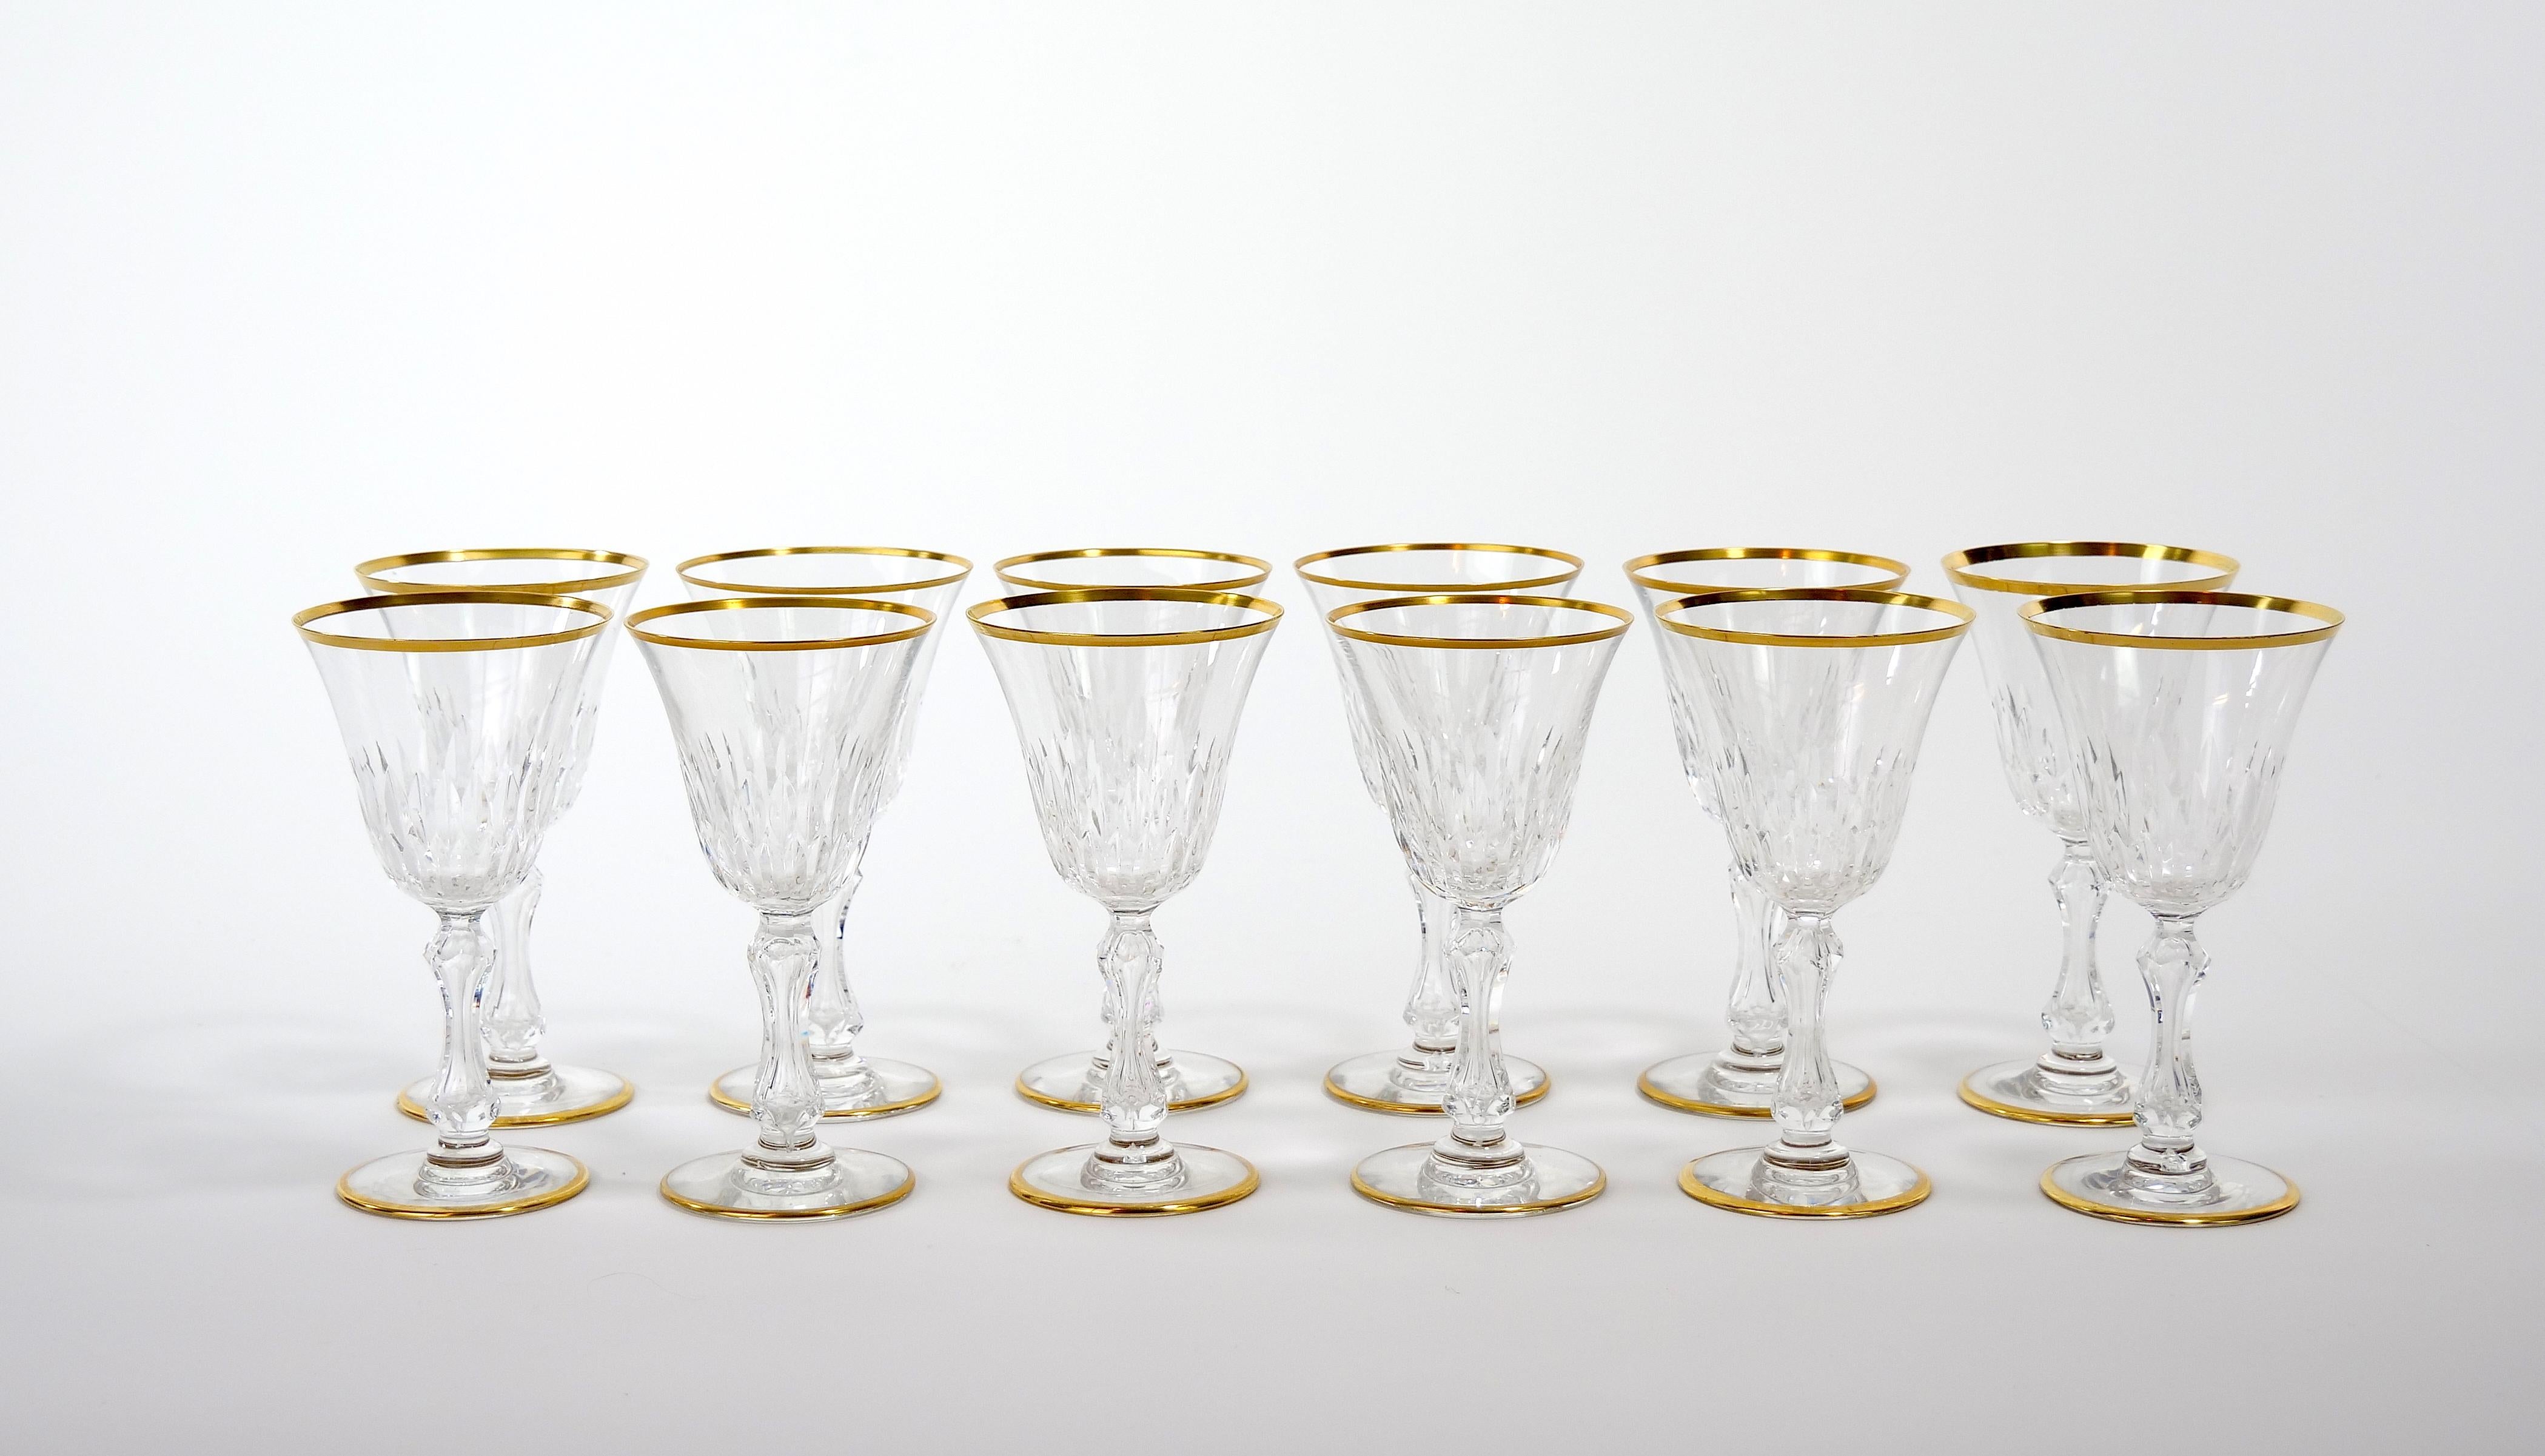 large and richly hand cut and mouth blown with hand gilt gold trim top / base barware and tableware glassware service for 12 people. Each glass features a deep cuts that allow the light to retract and shine to a brilliant finish from any angle.